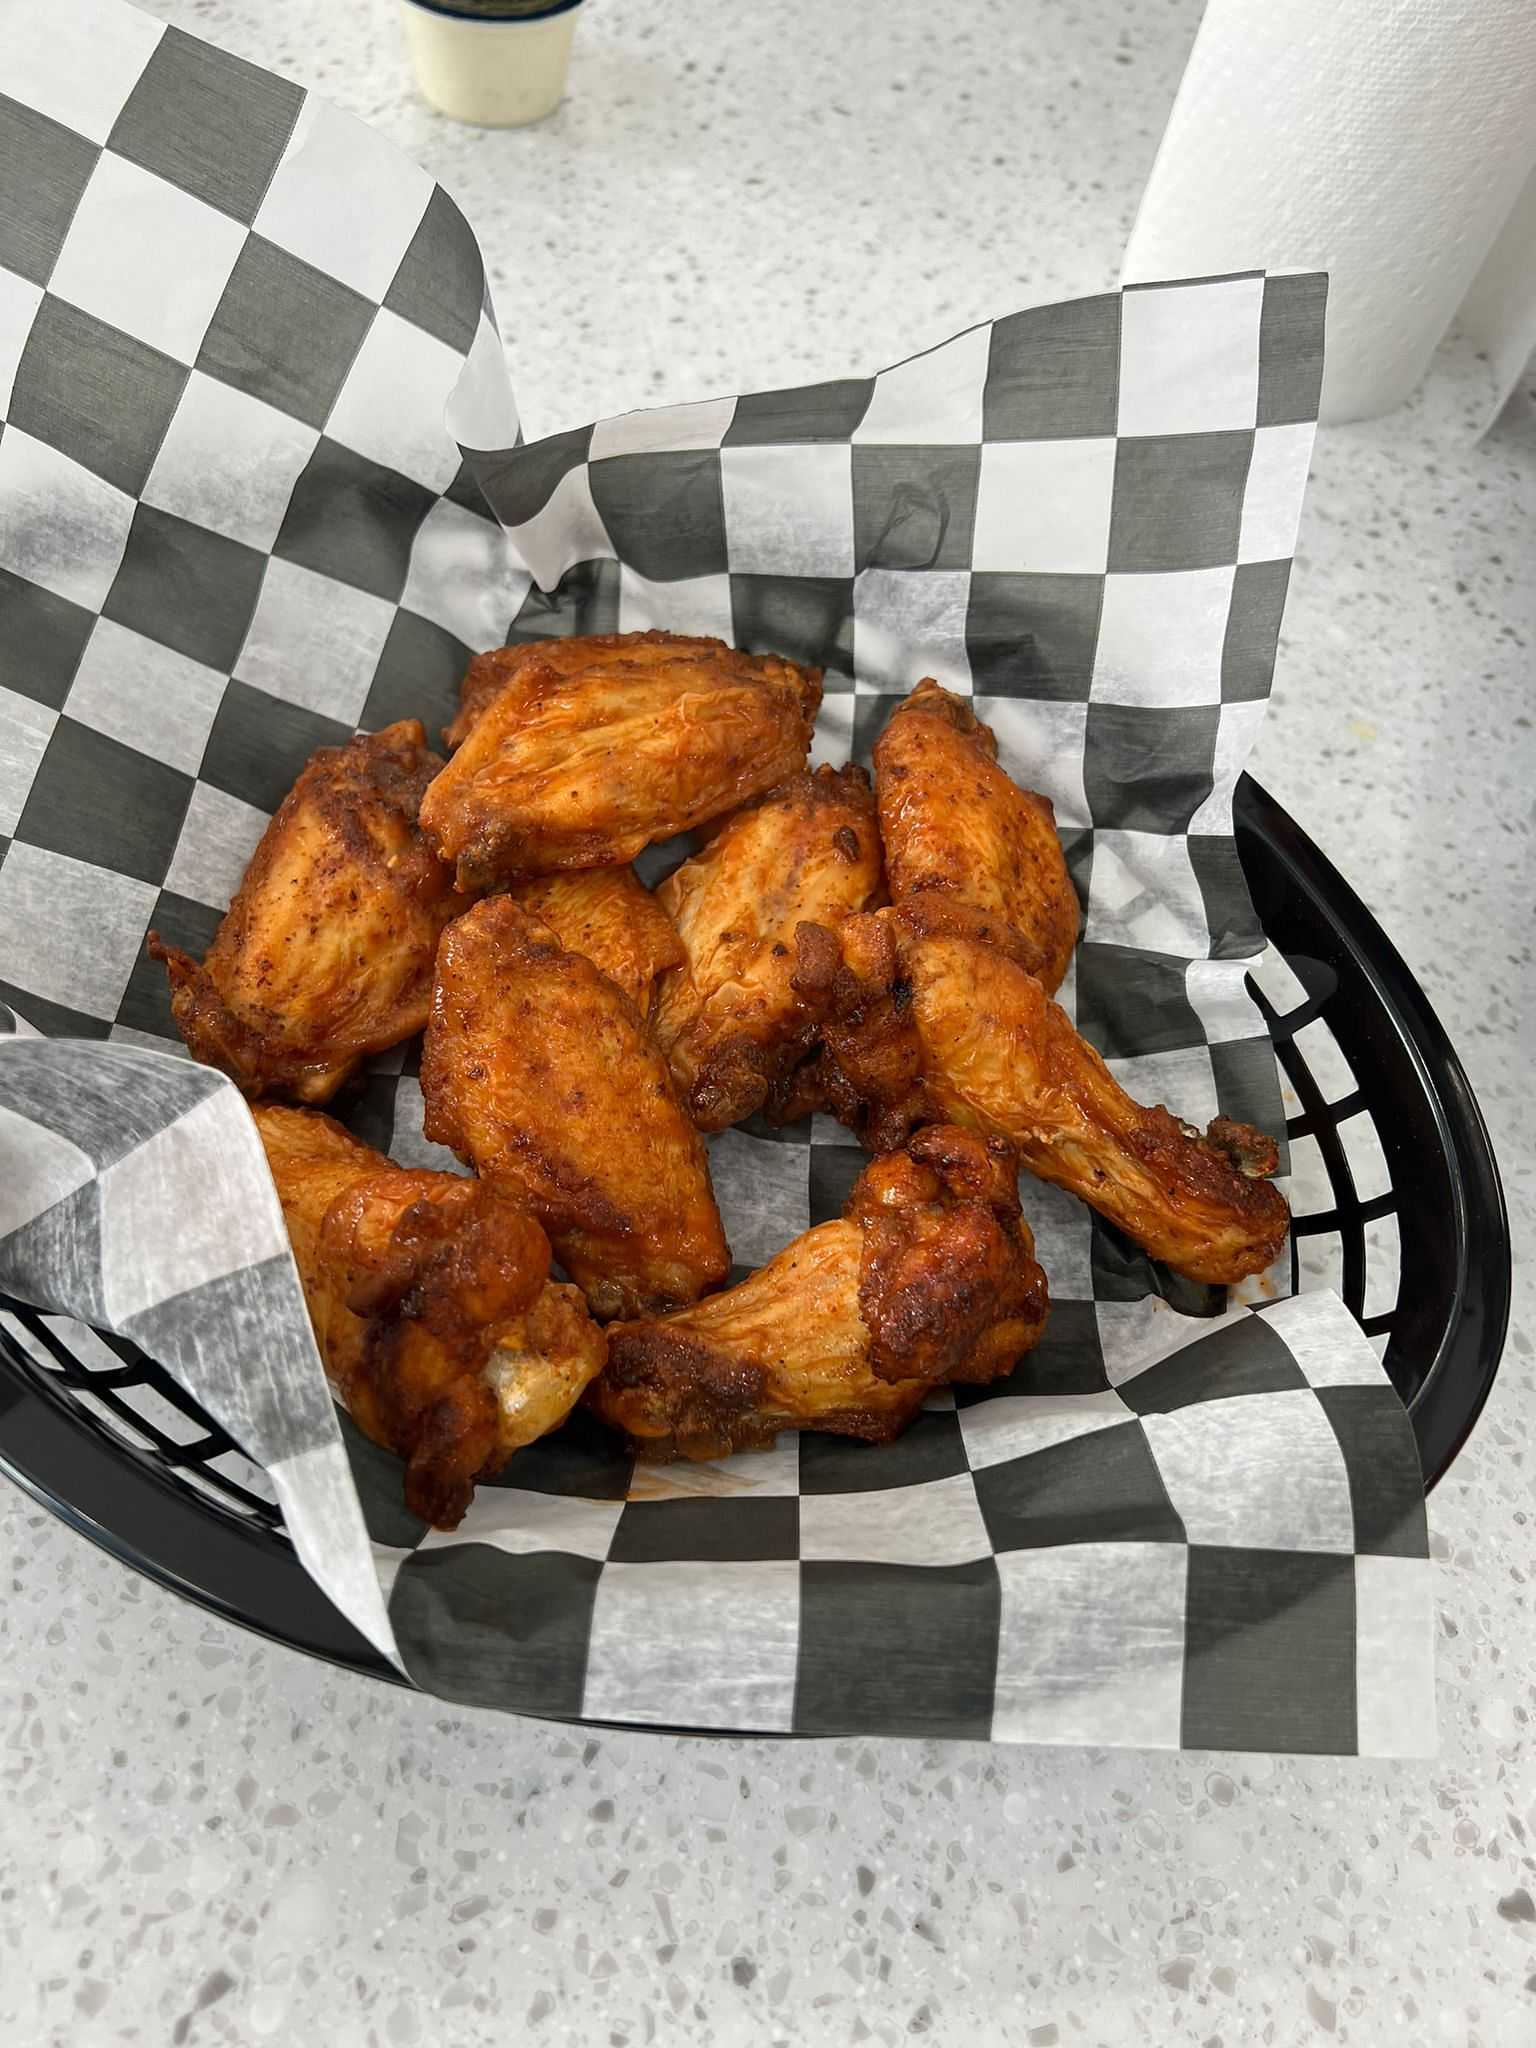 Basket of crispy, spicy fried chicken wings on a checkered paper-lined basket on a light countertop.